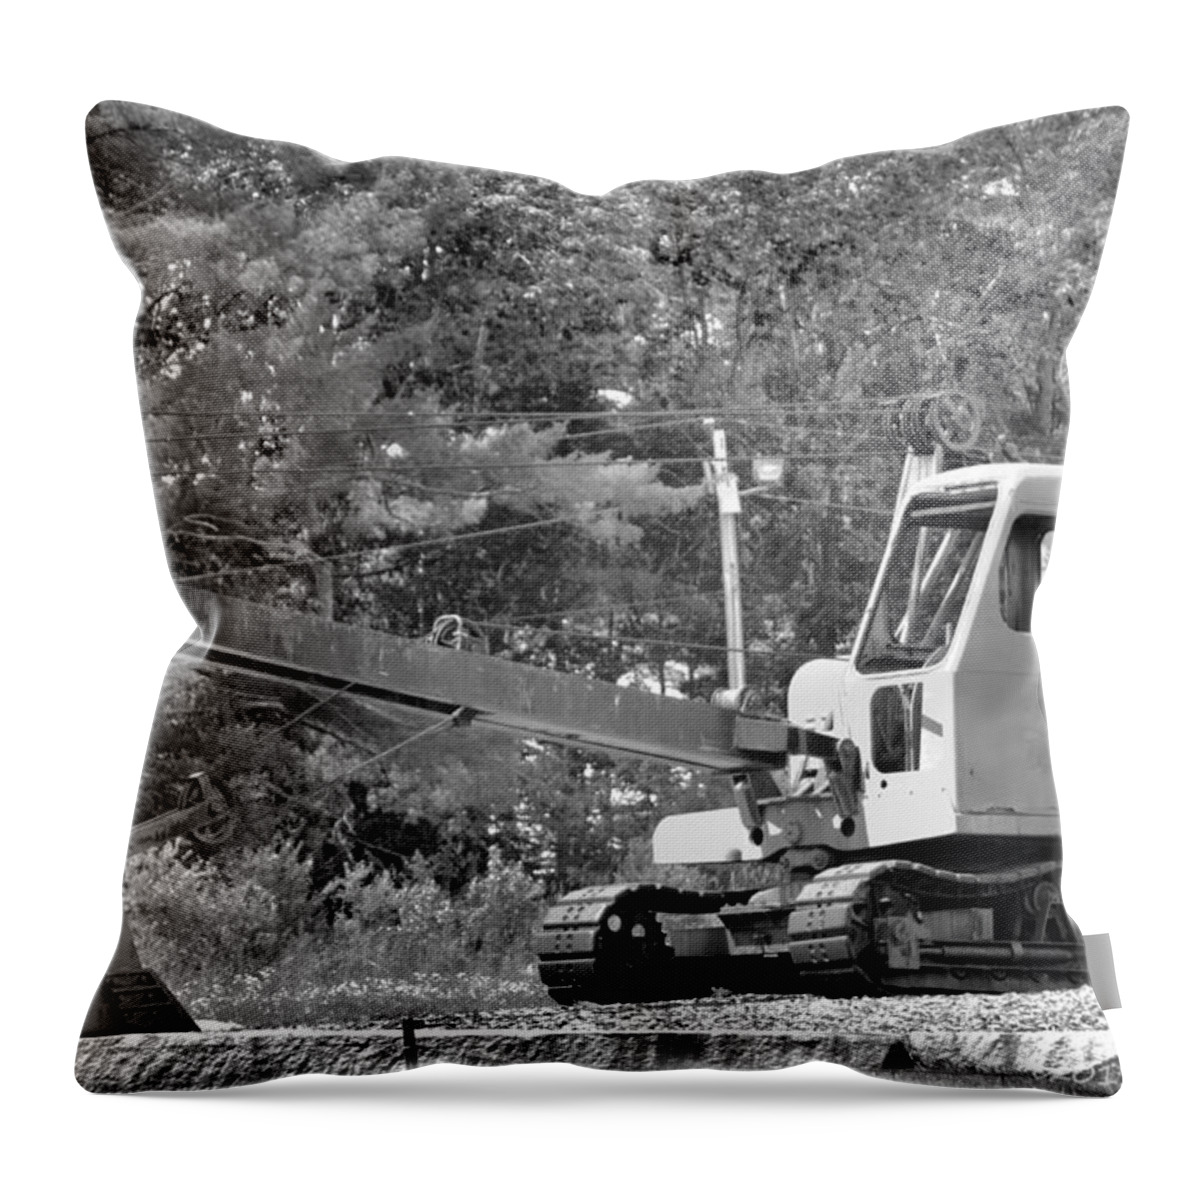 Old Throw Pillow featuring the photograph Old Backhoe by Tara Potts